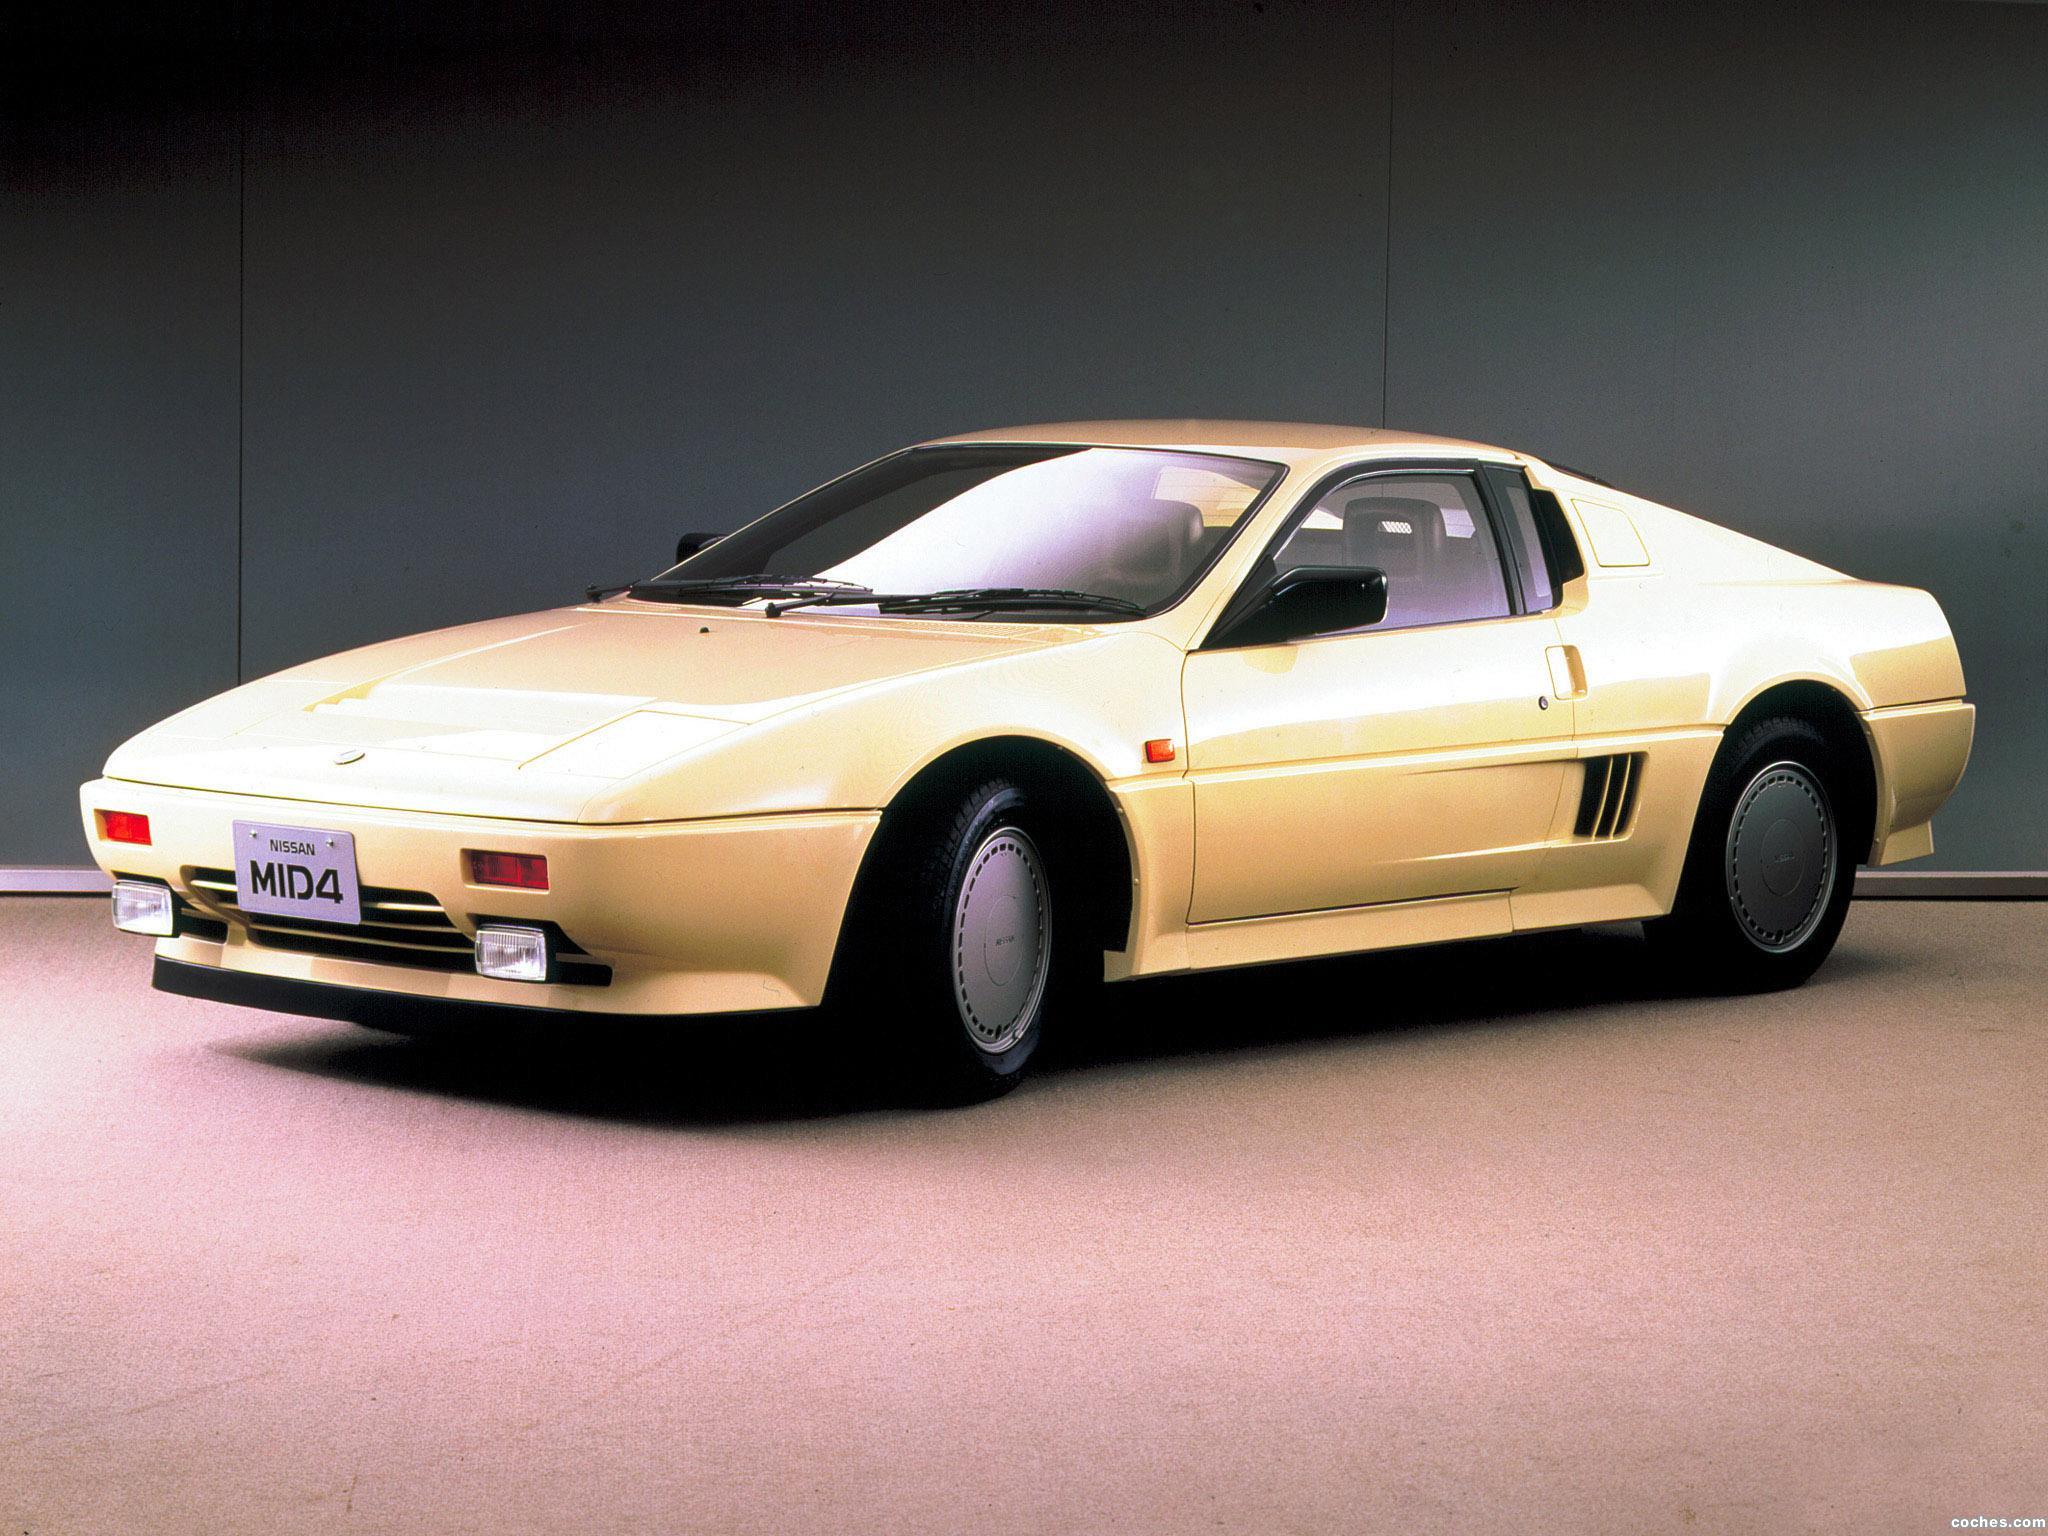 nissan_mid4-type-i-concept-1985_r2